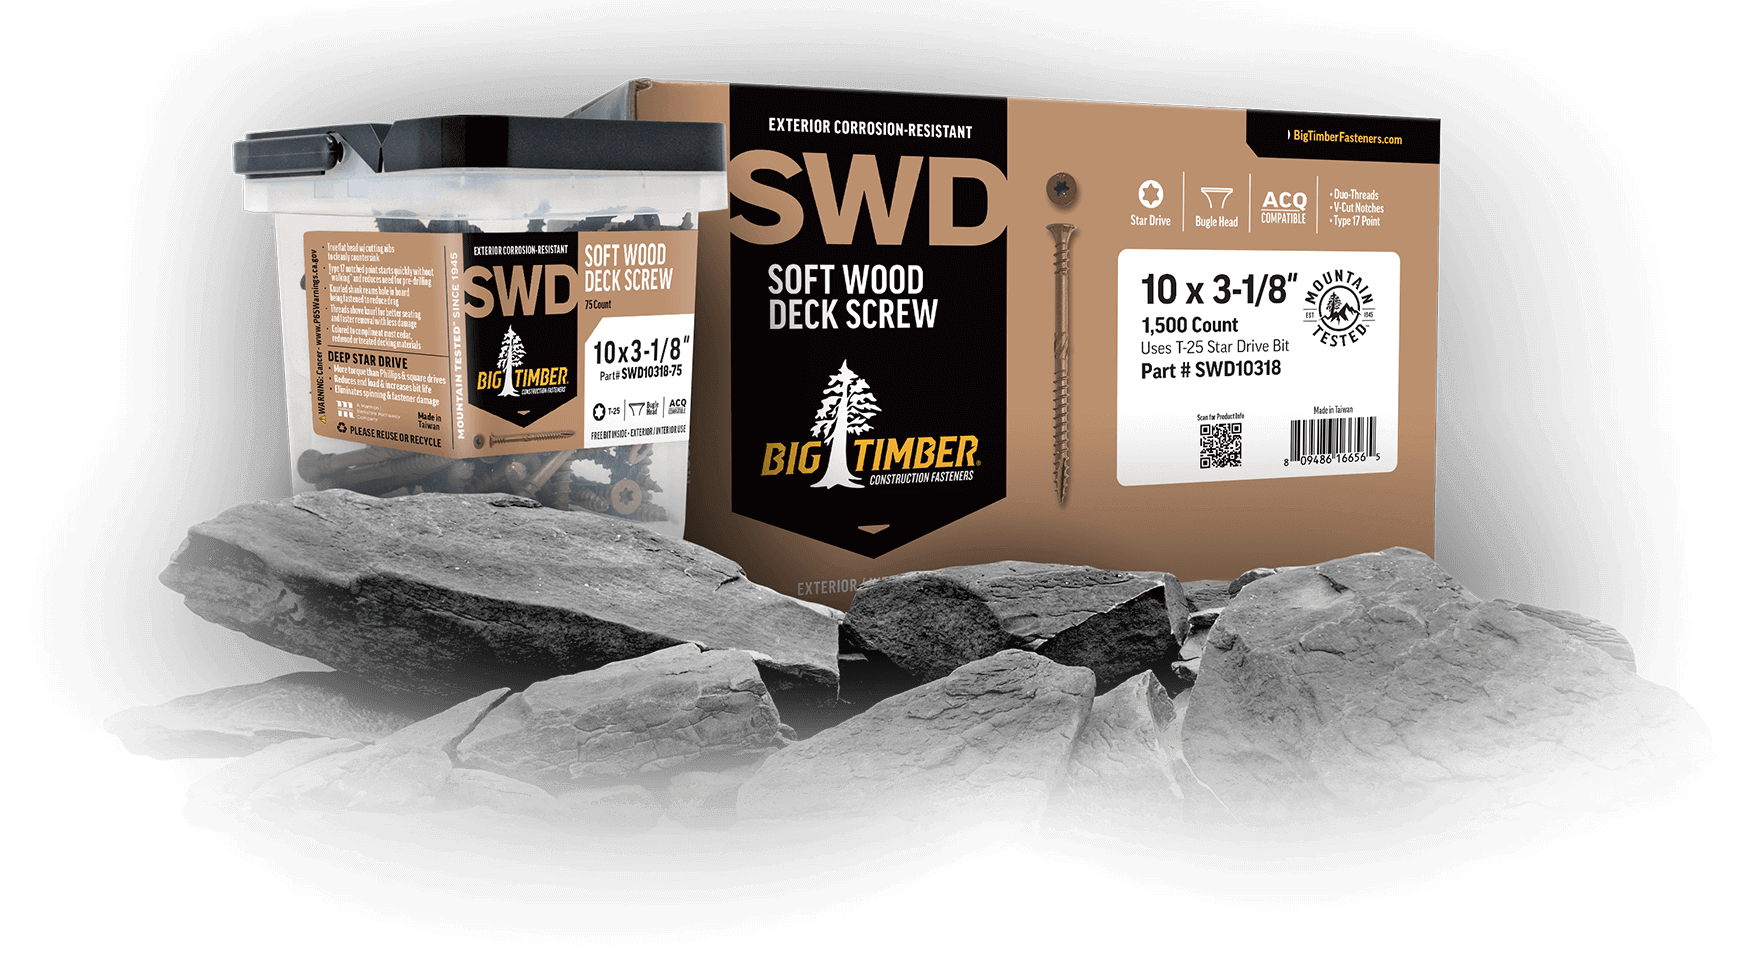 http://SWD%20Packaging